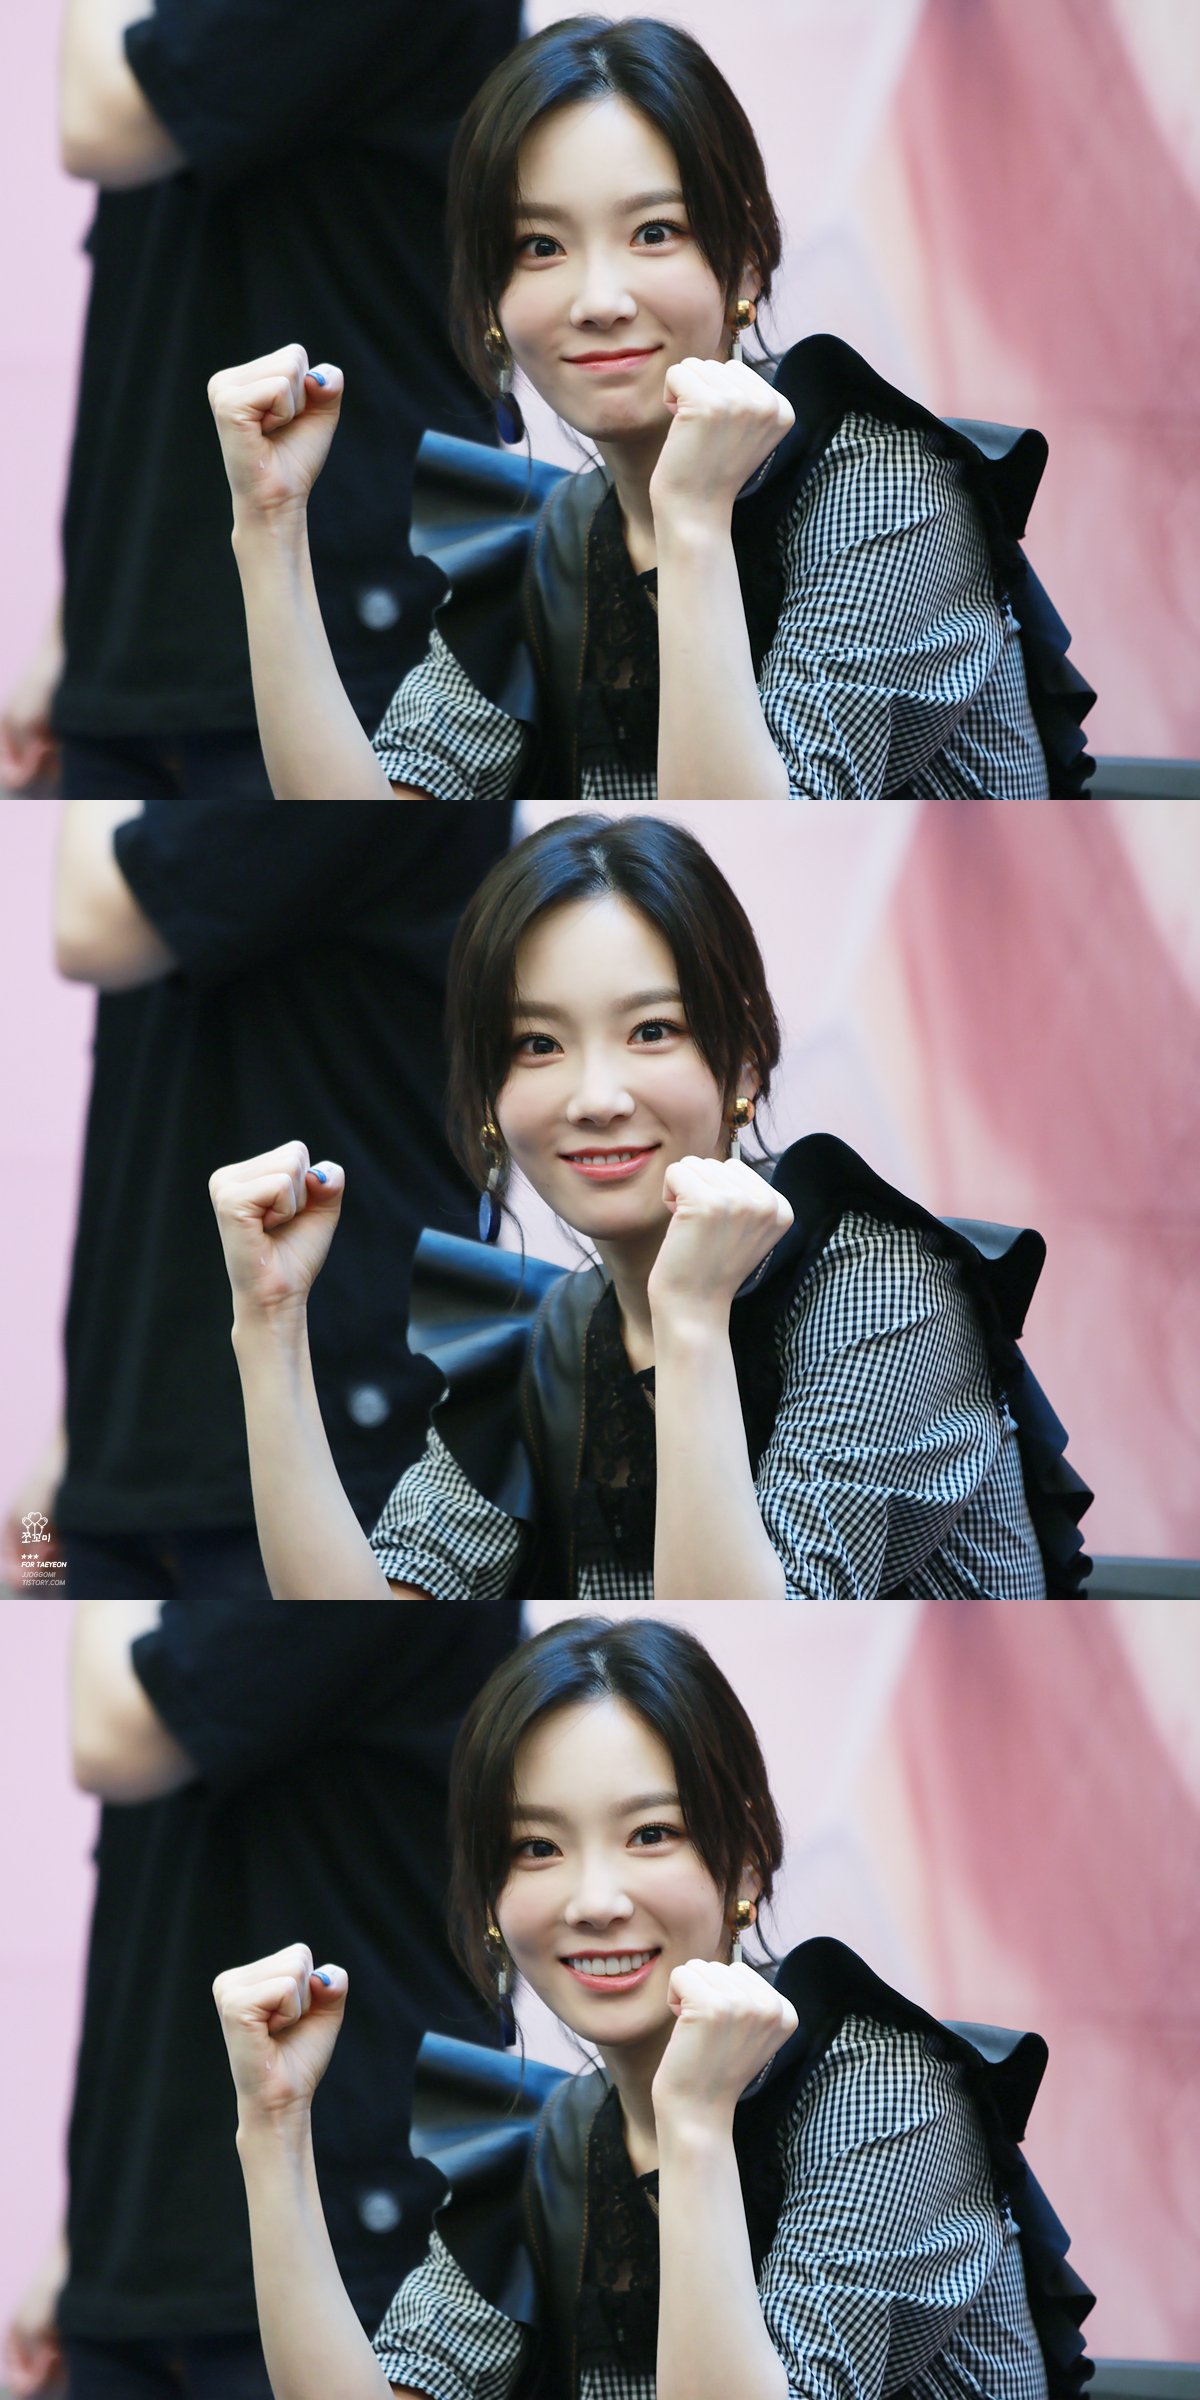 [PIC][16-04-2017]TaeYeon tham dự buổi Fansign cho “MY VOICE DELUXE EDITION” tại AK PLAZA vào chiều nay  - Page 3 ULvXd02odx-3000x3000